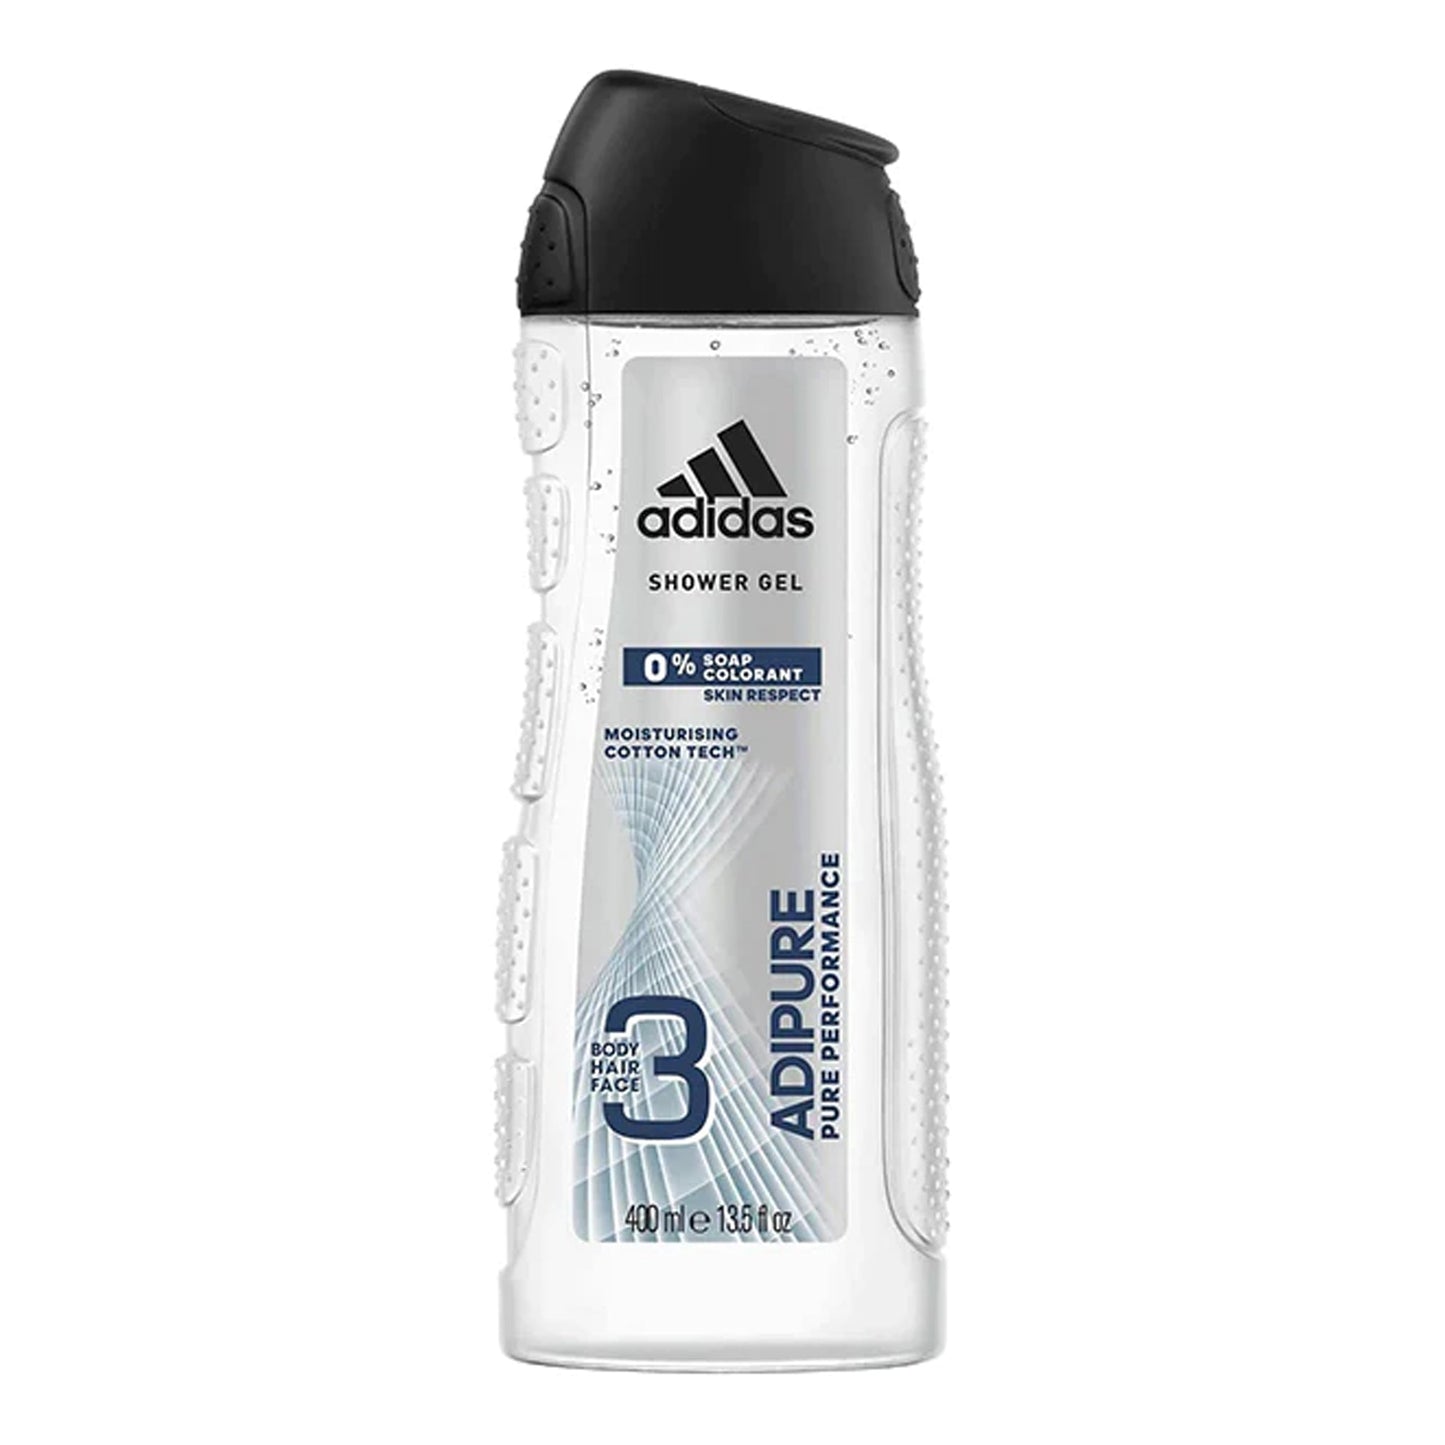 ADIDAS - ADIPURE PURE PERFORMANCE 3 IN 1 SHOWER GEL WITH MOISTURING COTTON TECH - 400ML